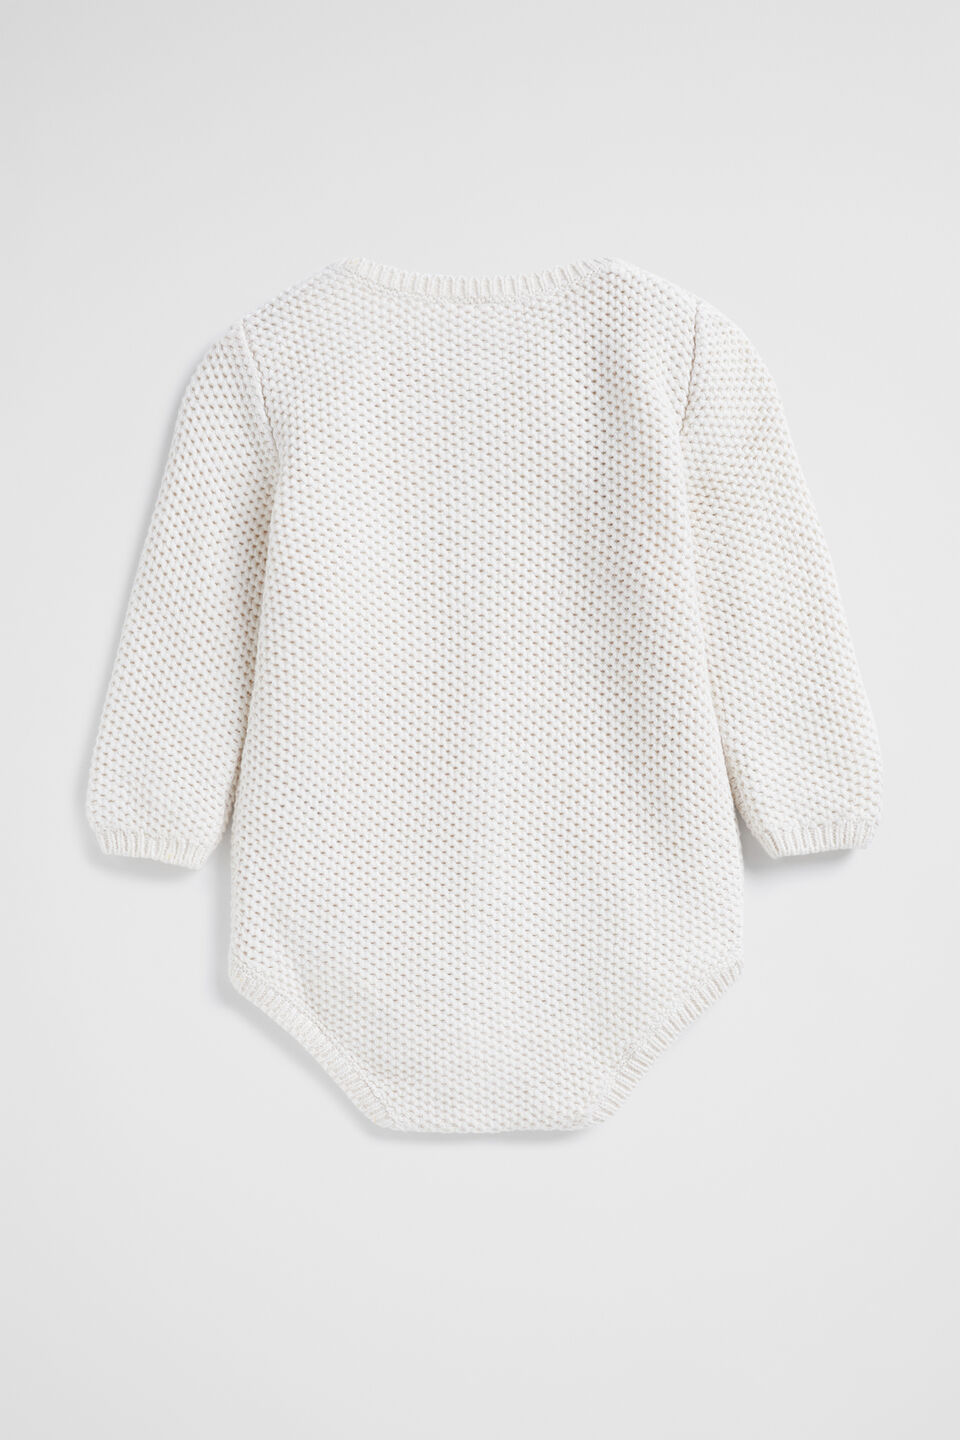 Textured Knit Romper  Snow Marle